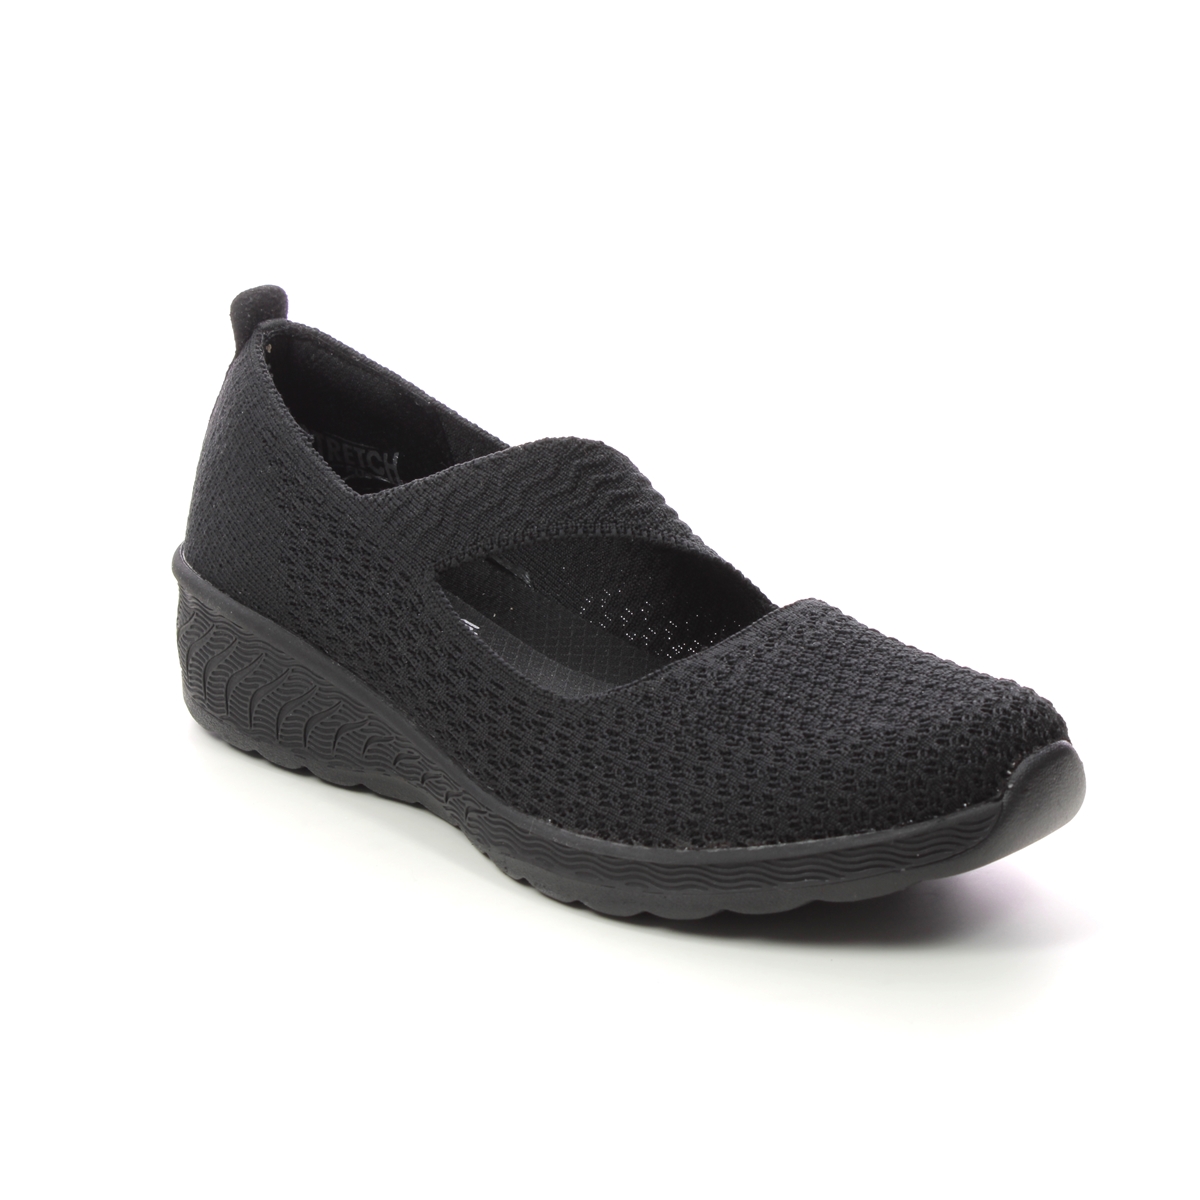 Skechers Up Lifted Relaxed Fit BBK Black Womens Mary Jane Shoes 100453